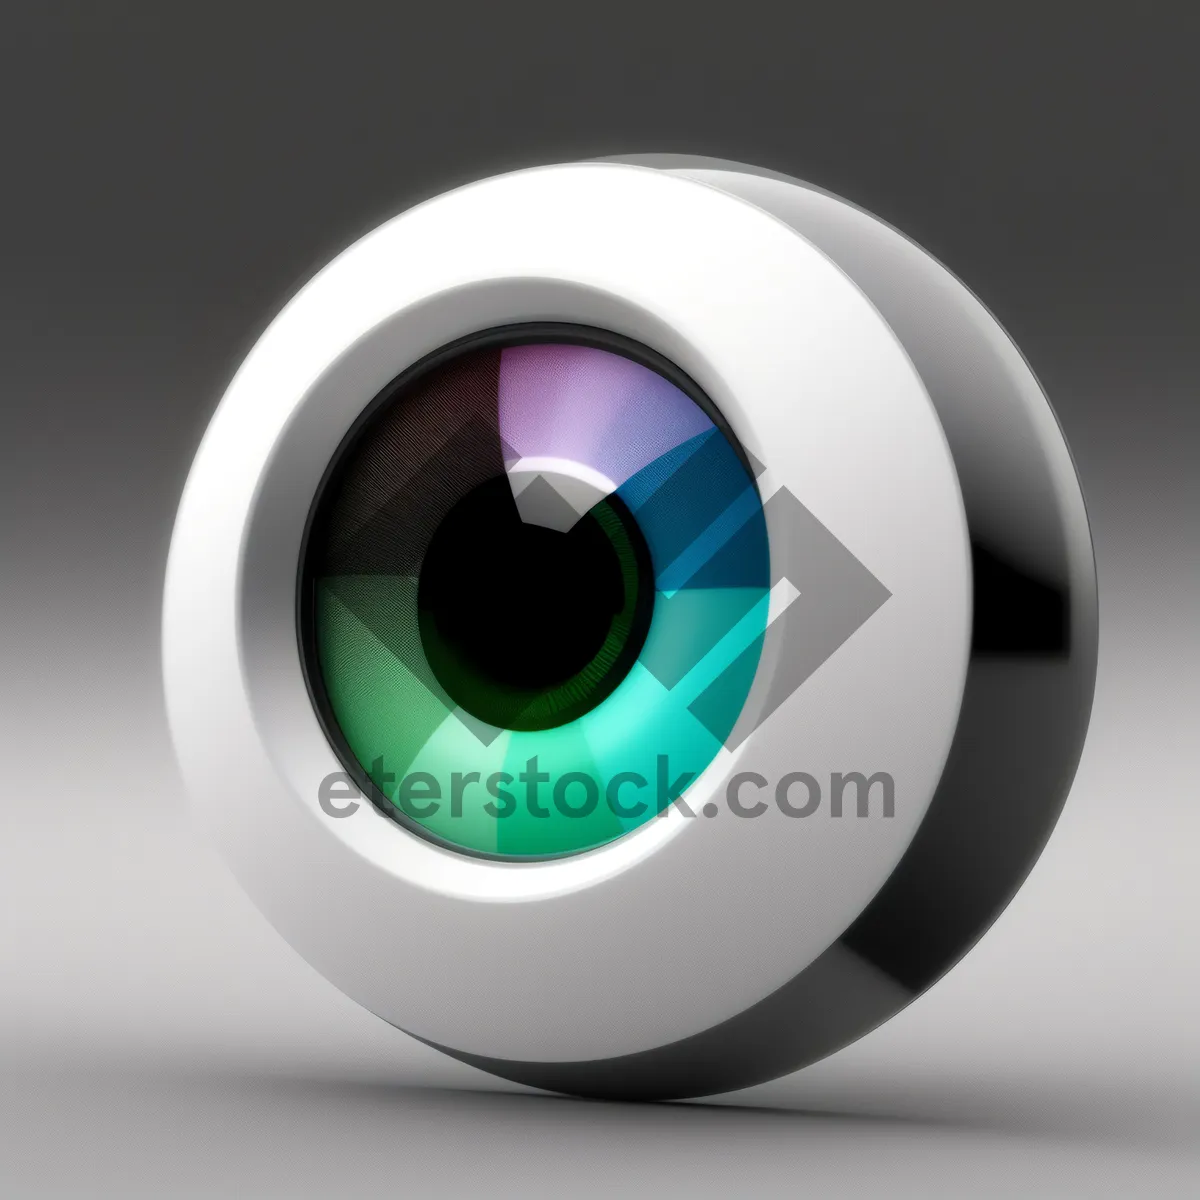 Picture of Modern Shiny Button Icon Set with Glass Reflection